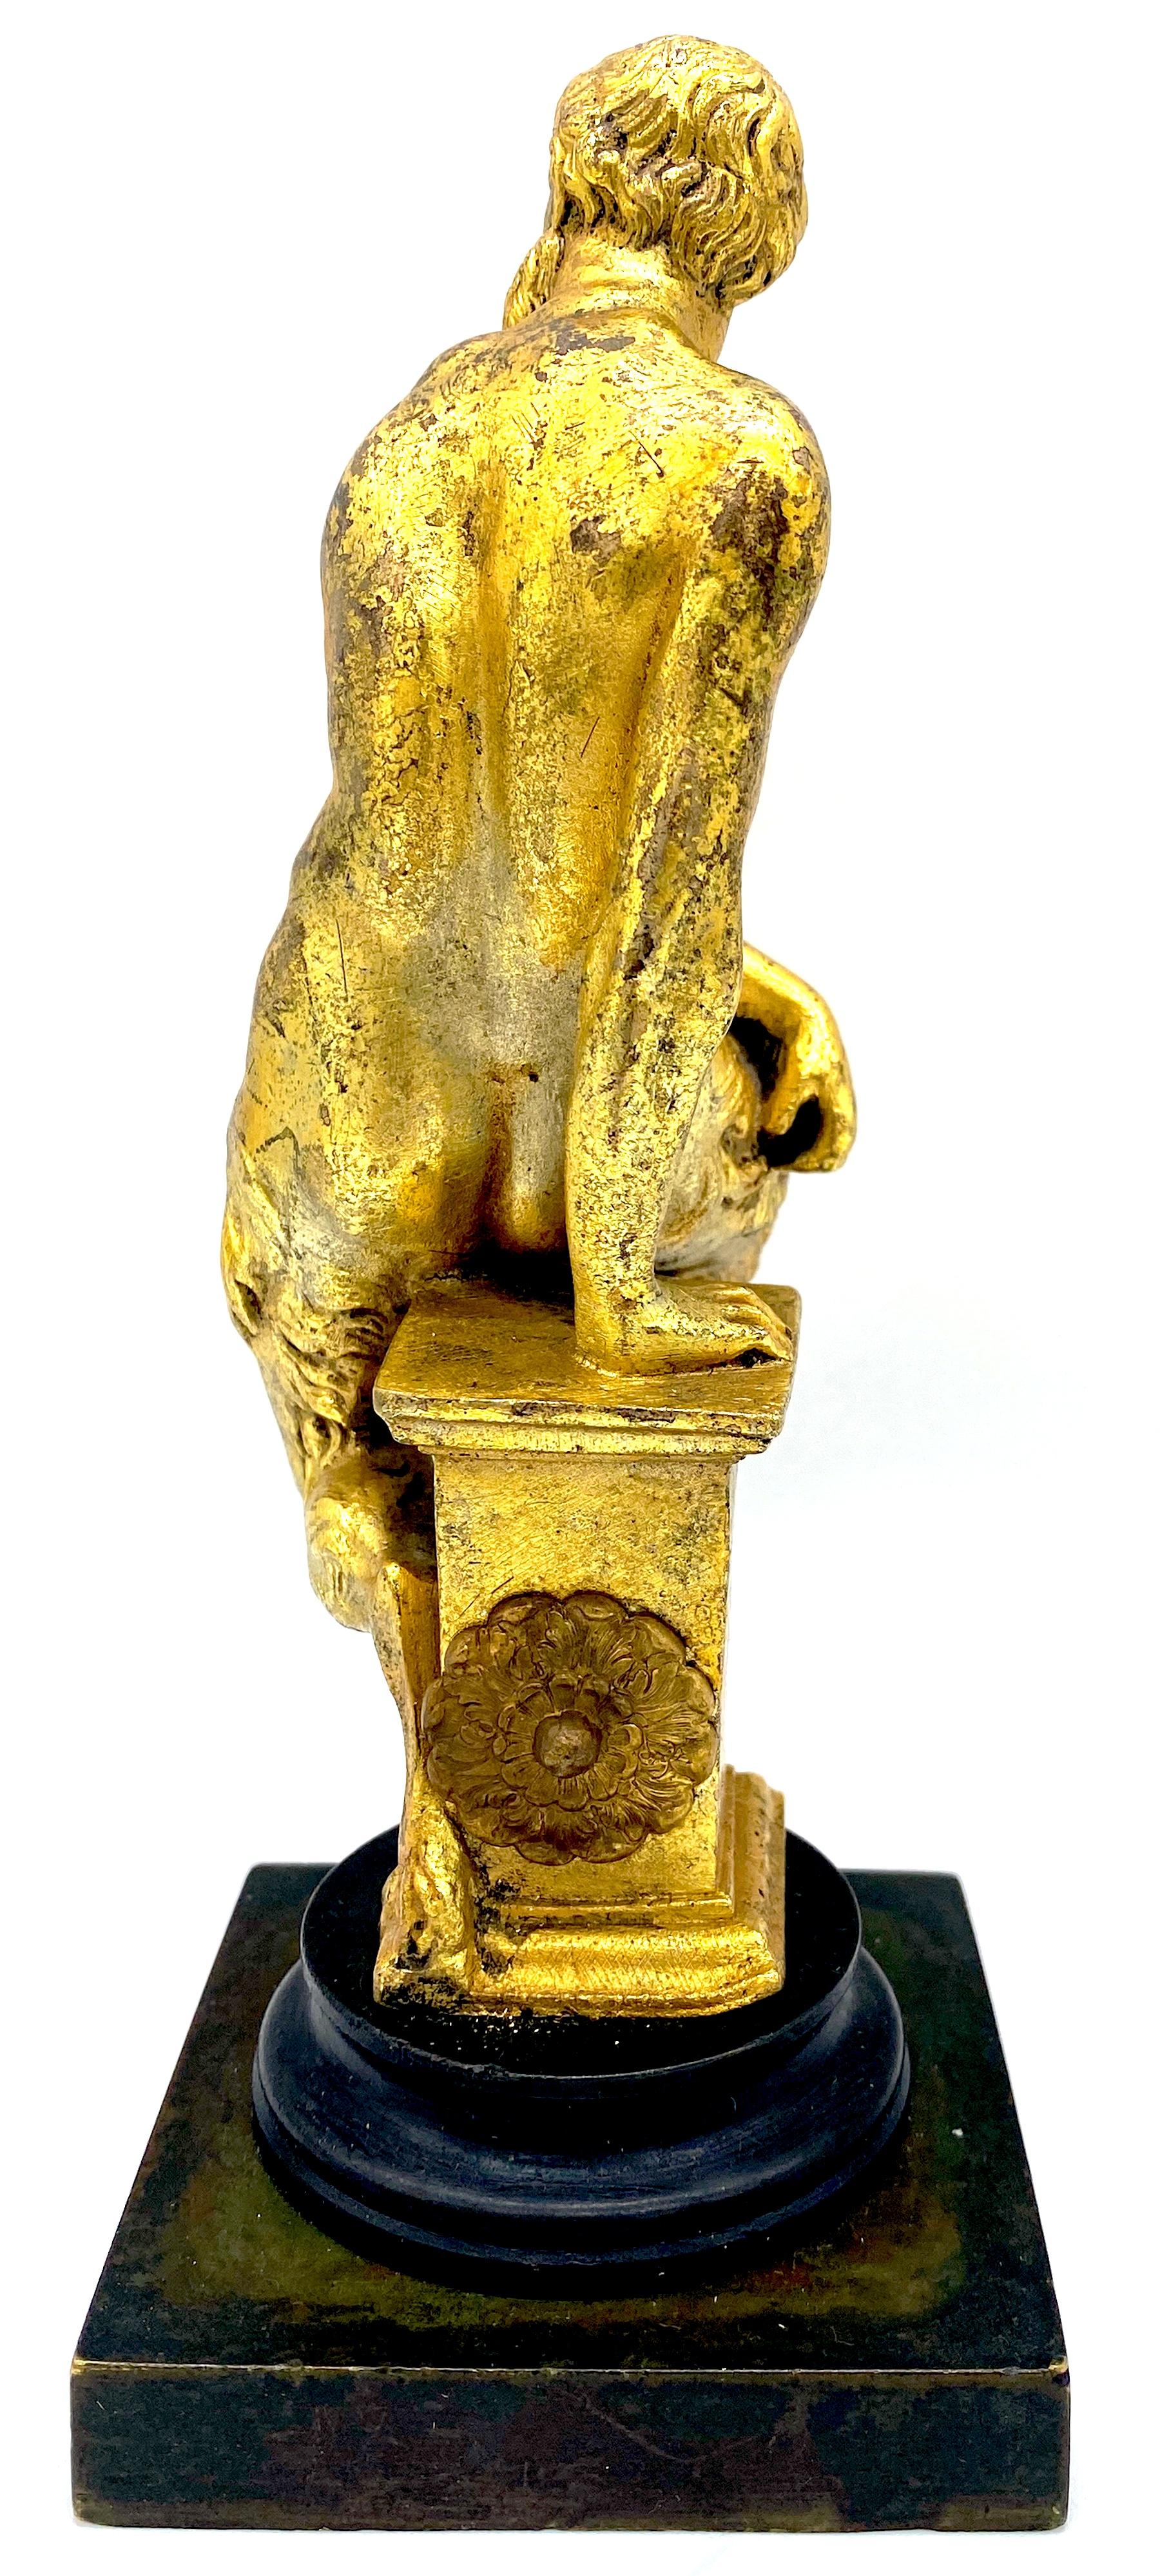 19th Century French Ormolu & Patinated Bronze Sculpture of a Seated Satyr  In Good Condition For Sale In West Palm Beach, FL